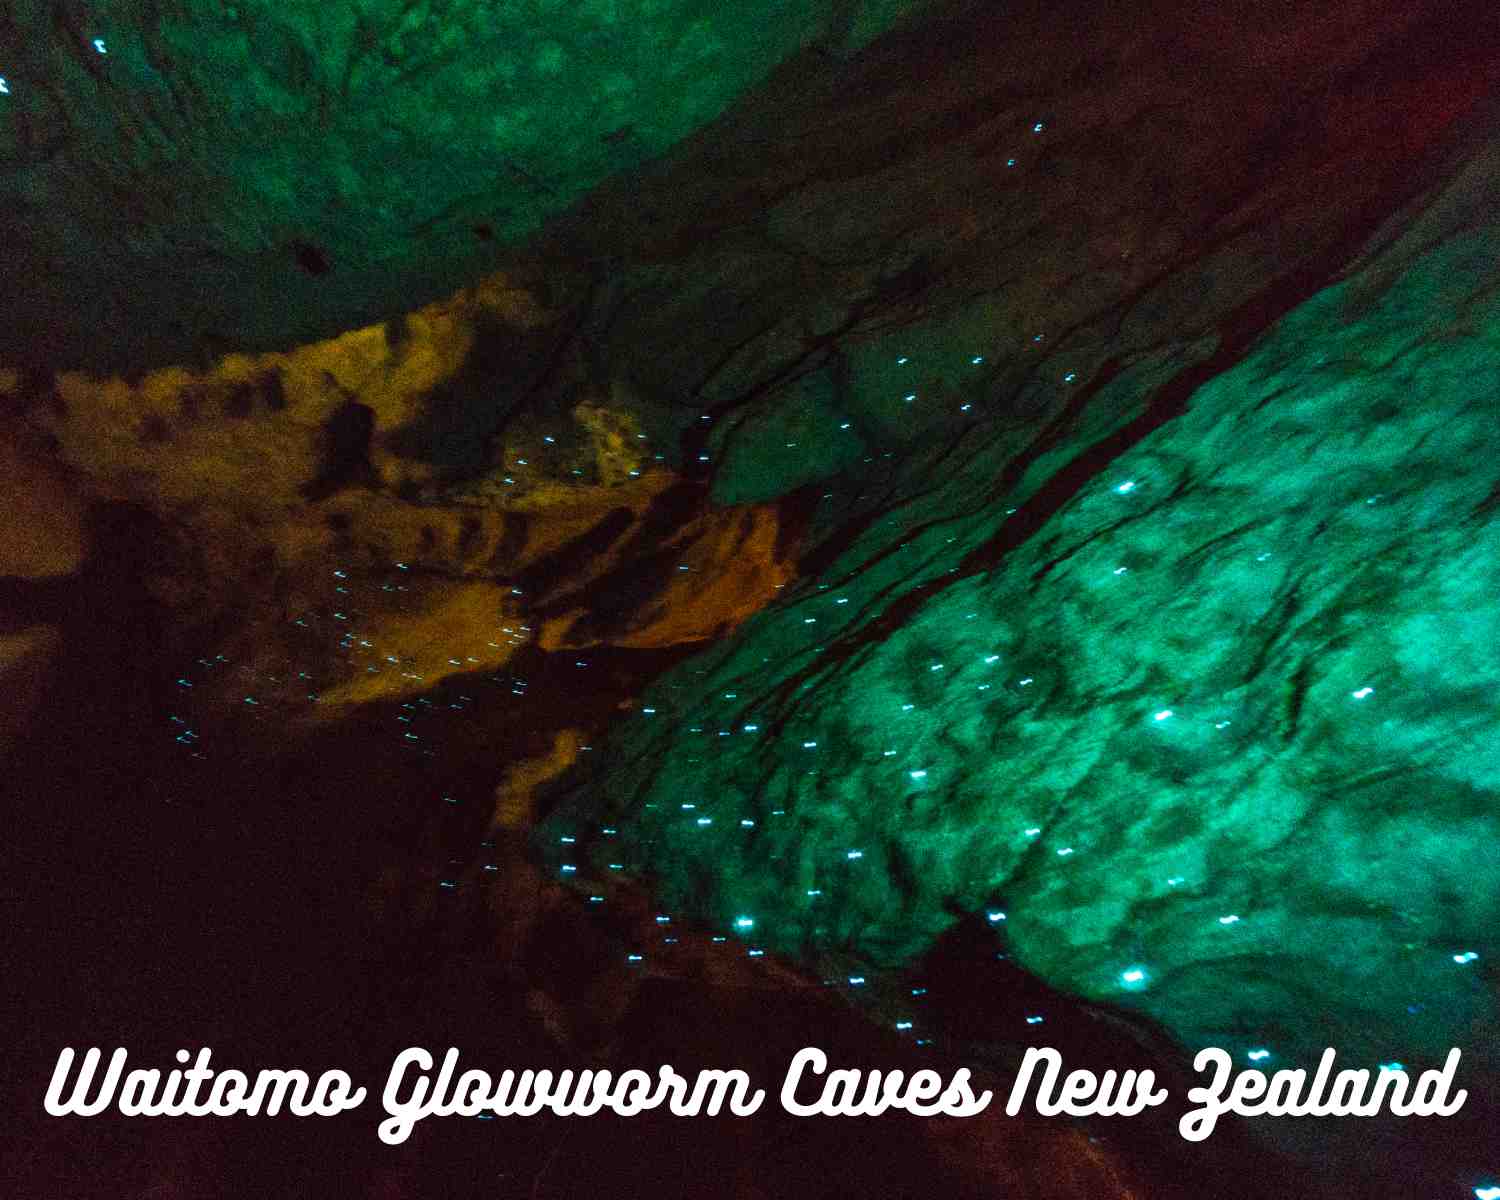 What are glowworms?